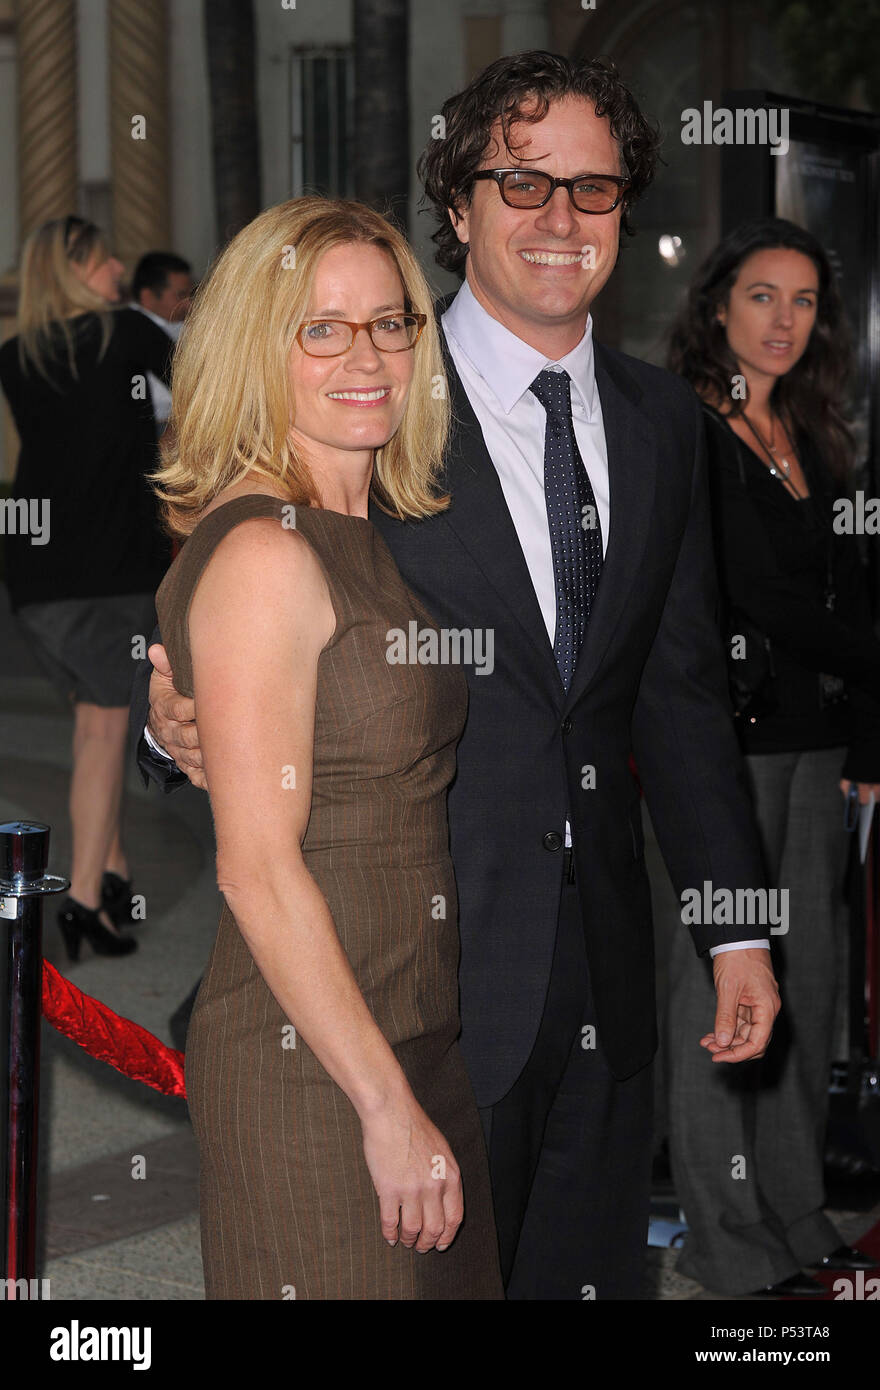 Davis Guggenheim, wife Elisabeth Shue Waiting For Superman  Premiere at the Paramount Theatre In Los Angeles.a Davis Guggenheim, wife Elisabeth Shue 12  Event in Hollywood Life - California, Red Carpet Event, USA, Film Industry, Celebrities, Photography, Bestof, Arts Culture and Entertainment, Celebrities fashion, Best of, Hollywood Life, Event in Hollywood Life - California, Red Carpet and backstage, Music celebrities, Topix, Couple, family ( husband and wife ) and kids- Children, brothers and sisters inquiry tsuni@Gamma-USA.com, Credit Tsuni / USA, 2010 Stock Photo